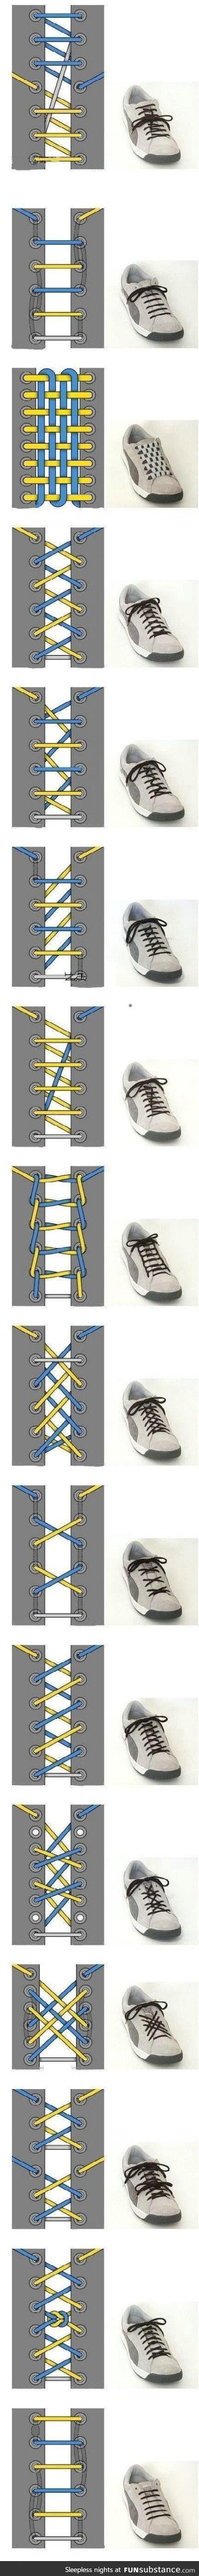 There's more than one way to tie your shoe